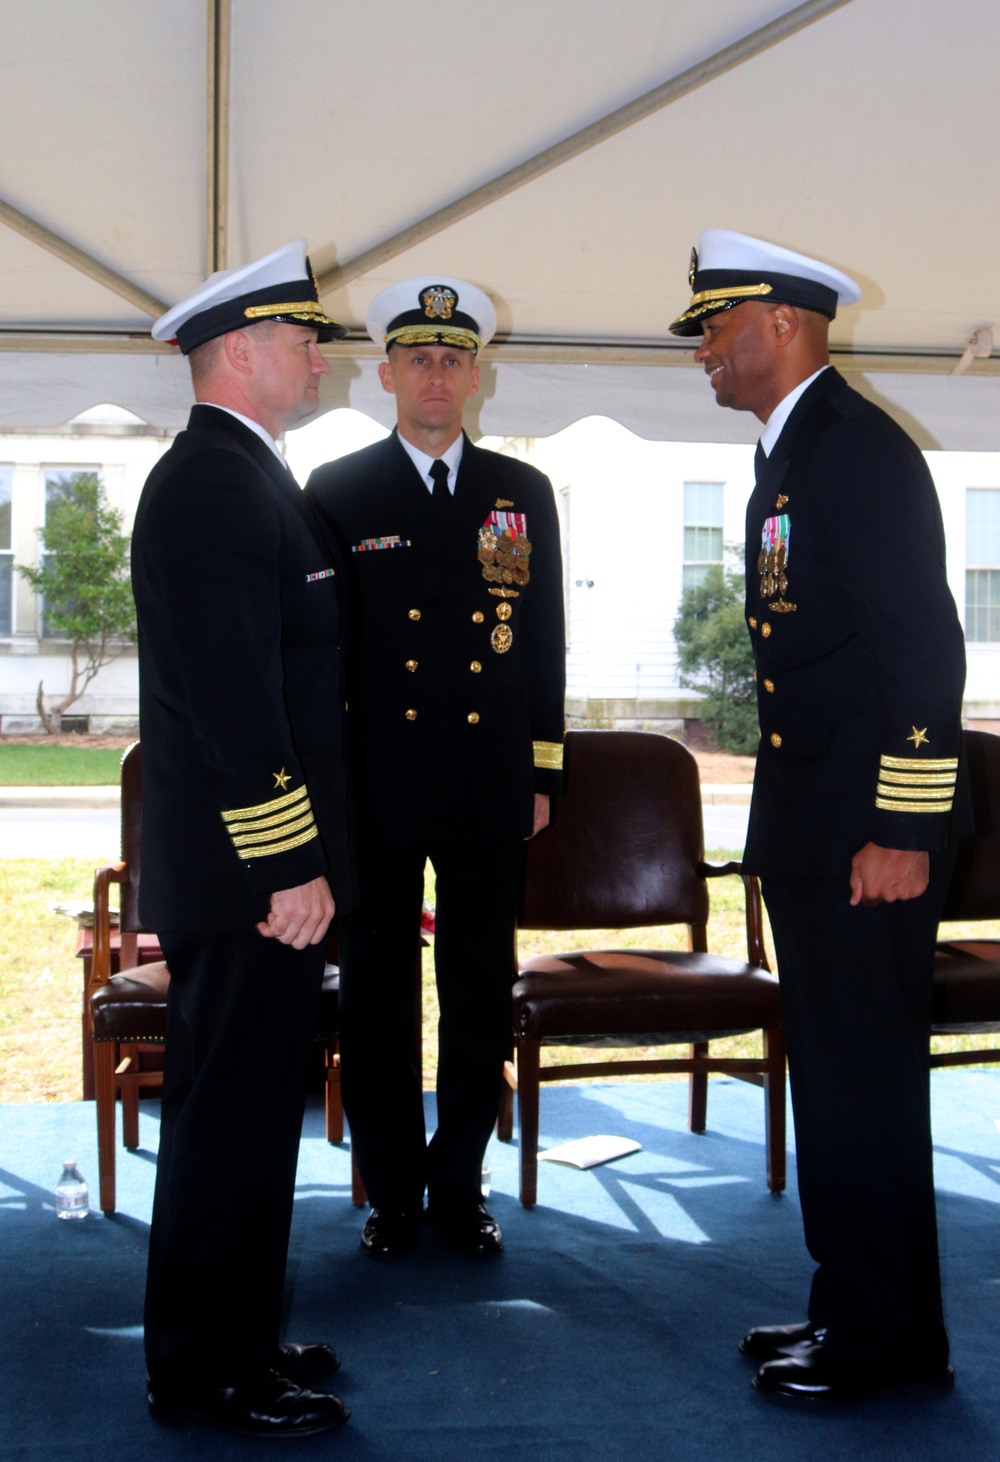 Change of Command at U.S. Naval Observatory